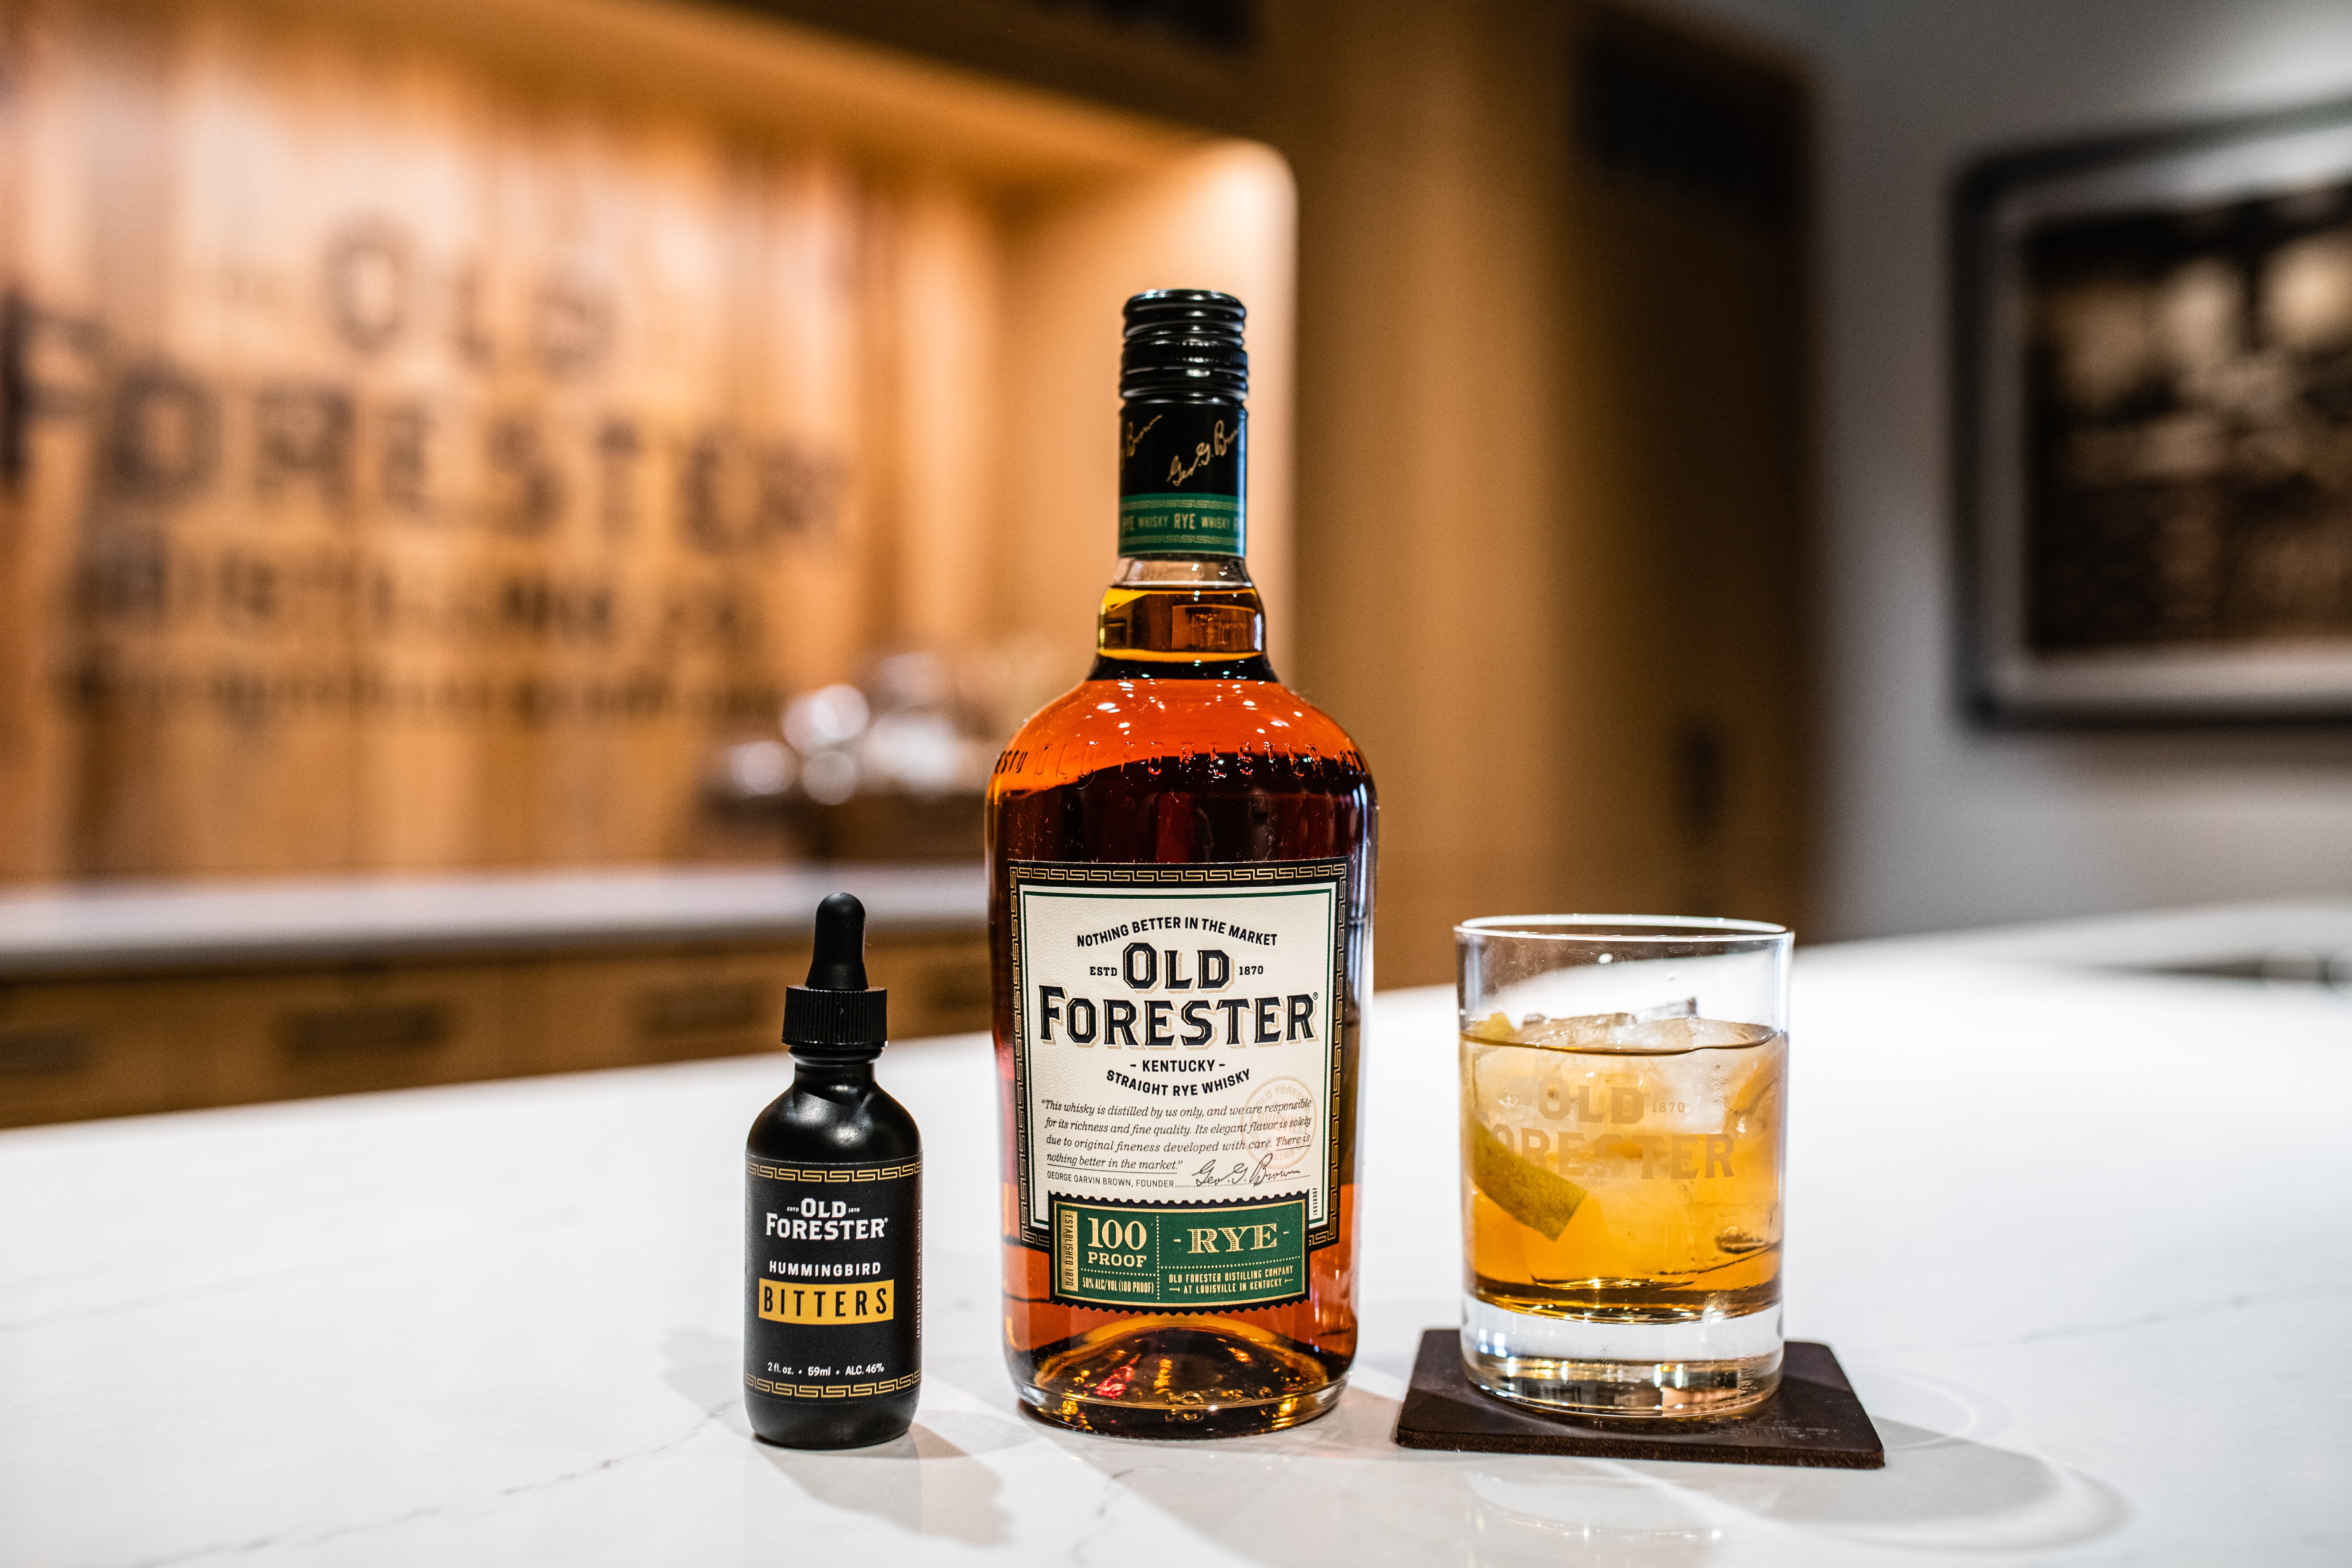 Old Forester Rye Old Fashioned